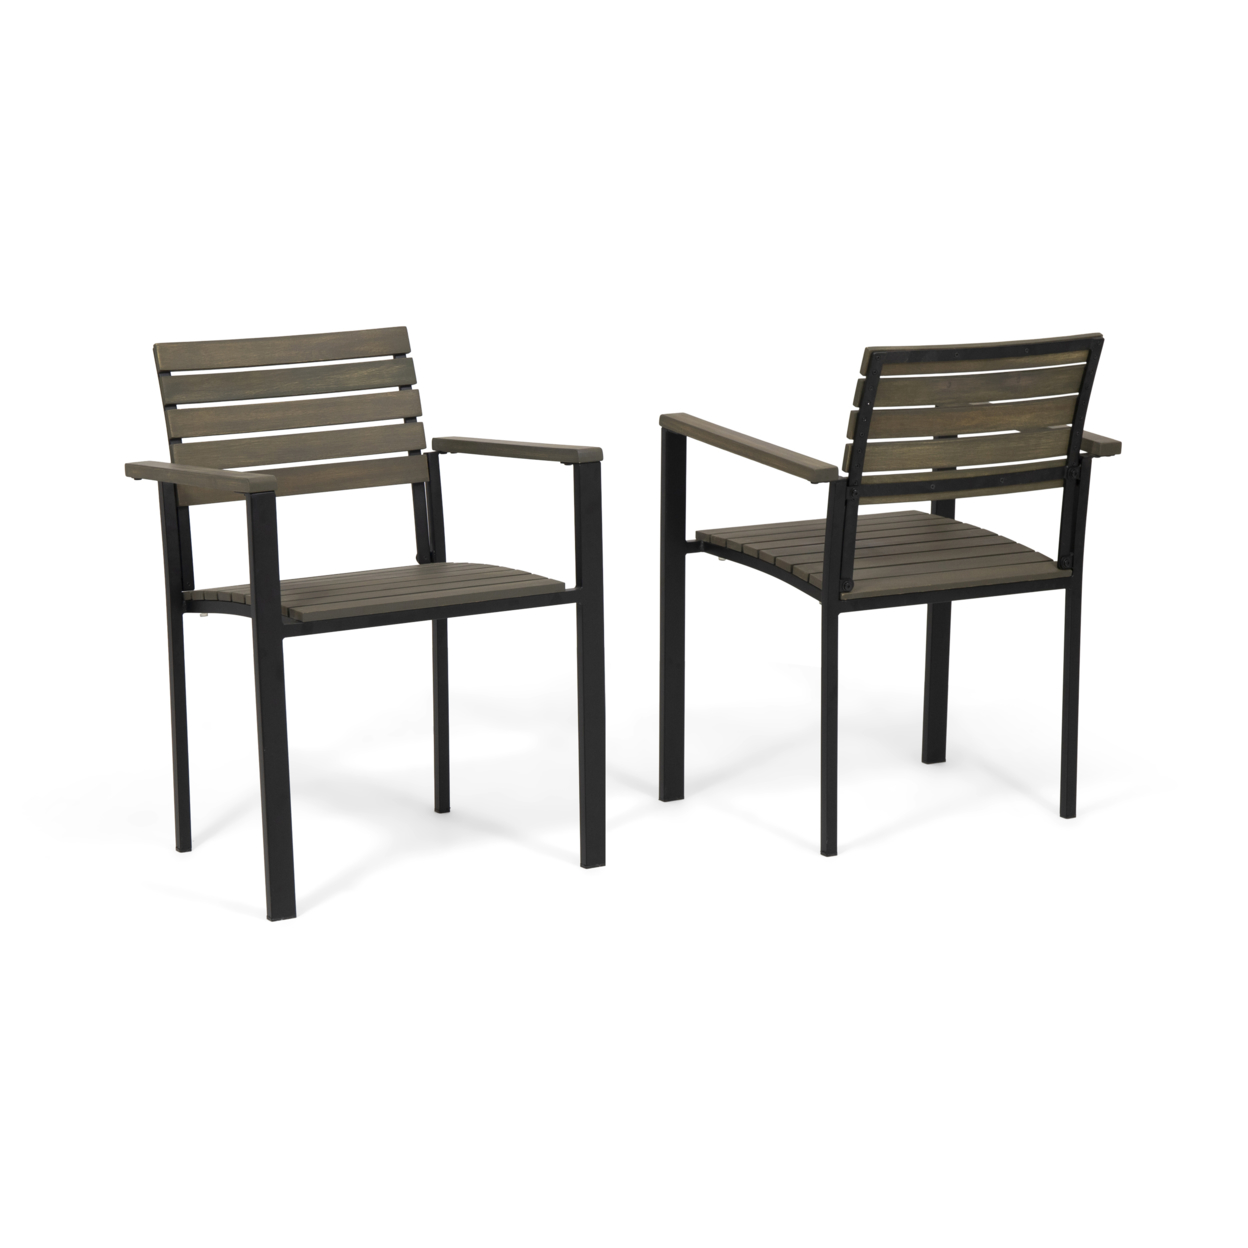 Alberta Outdoor Wood And Iron Dining Chairs (Set Of 2) - Gray Finish, Black